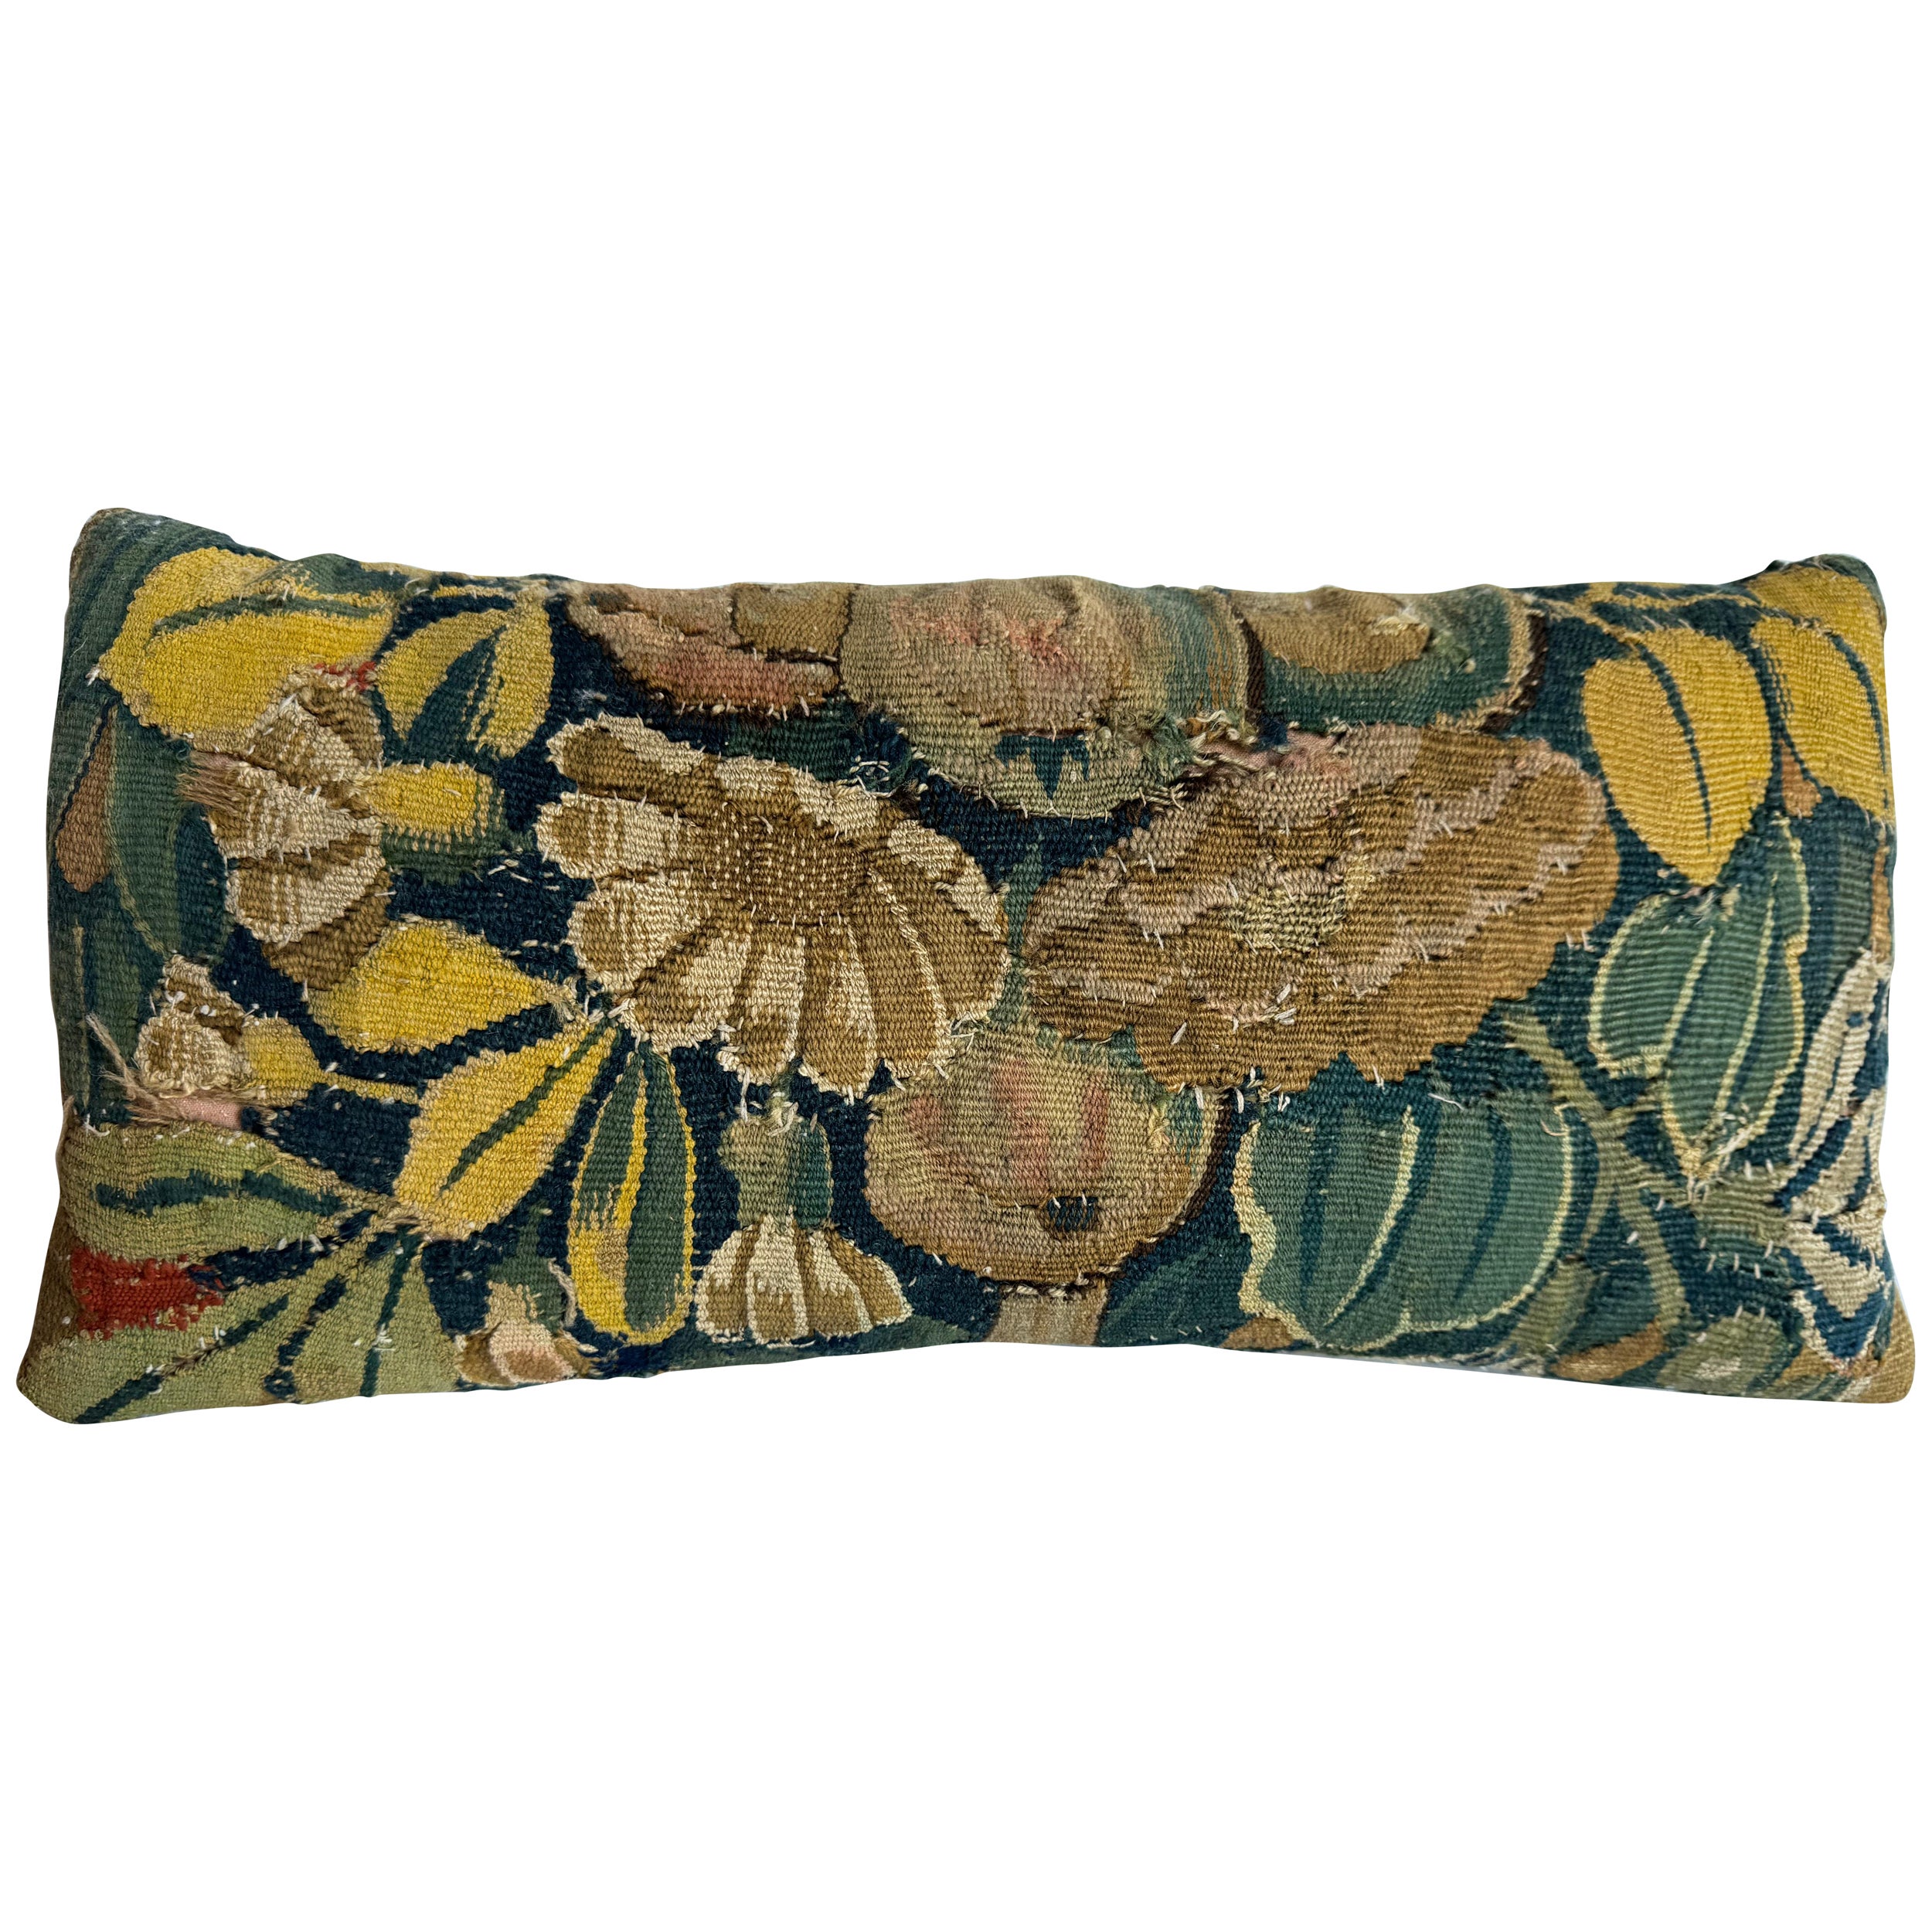  Brussels 16th Century Pillow - 19"x9"